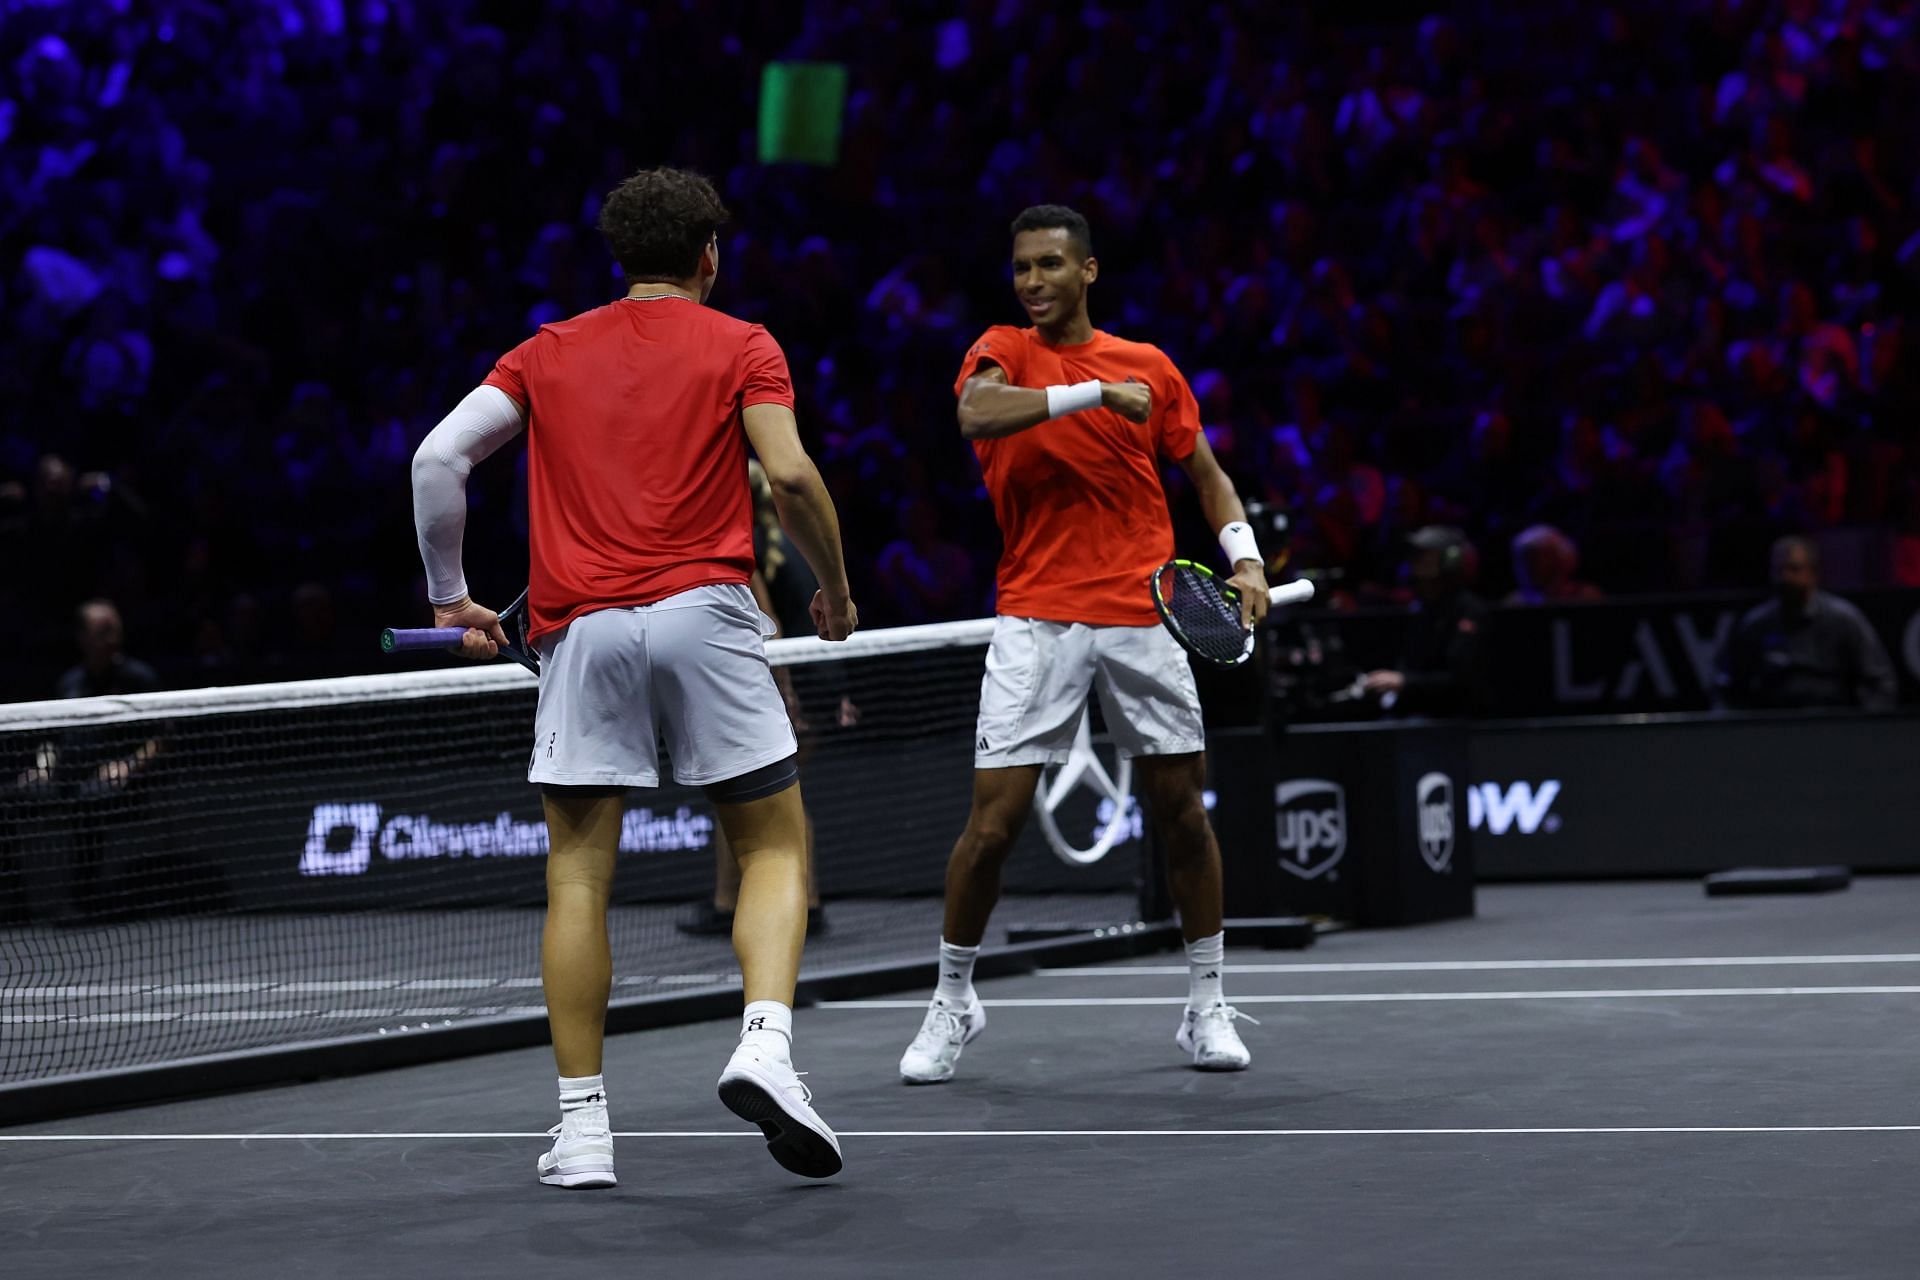 Felix Auger-Aliassime and Ben Shelton will also be in action on Day 3 of the Laver Cup.